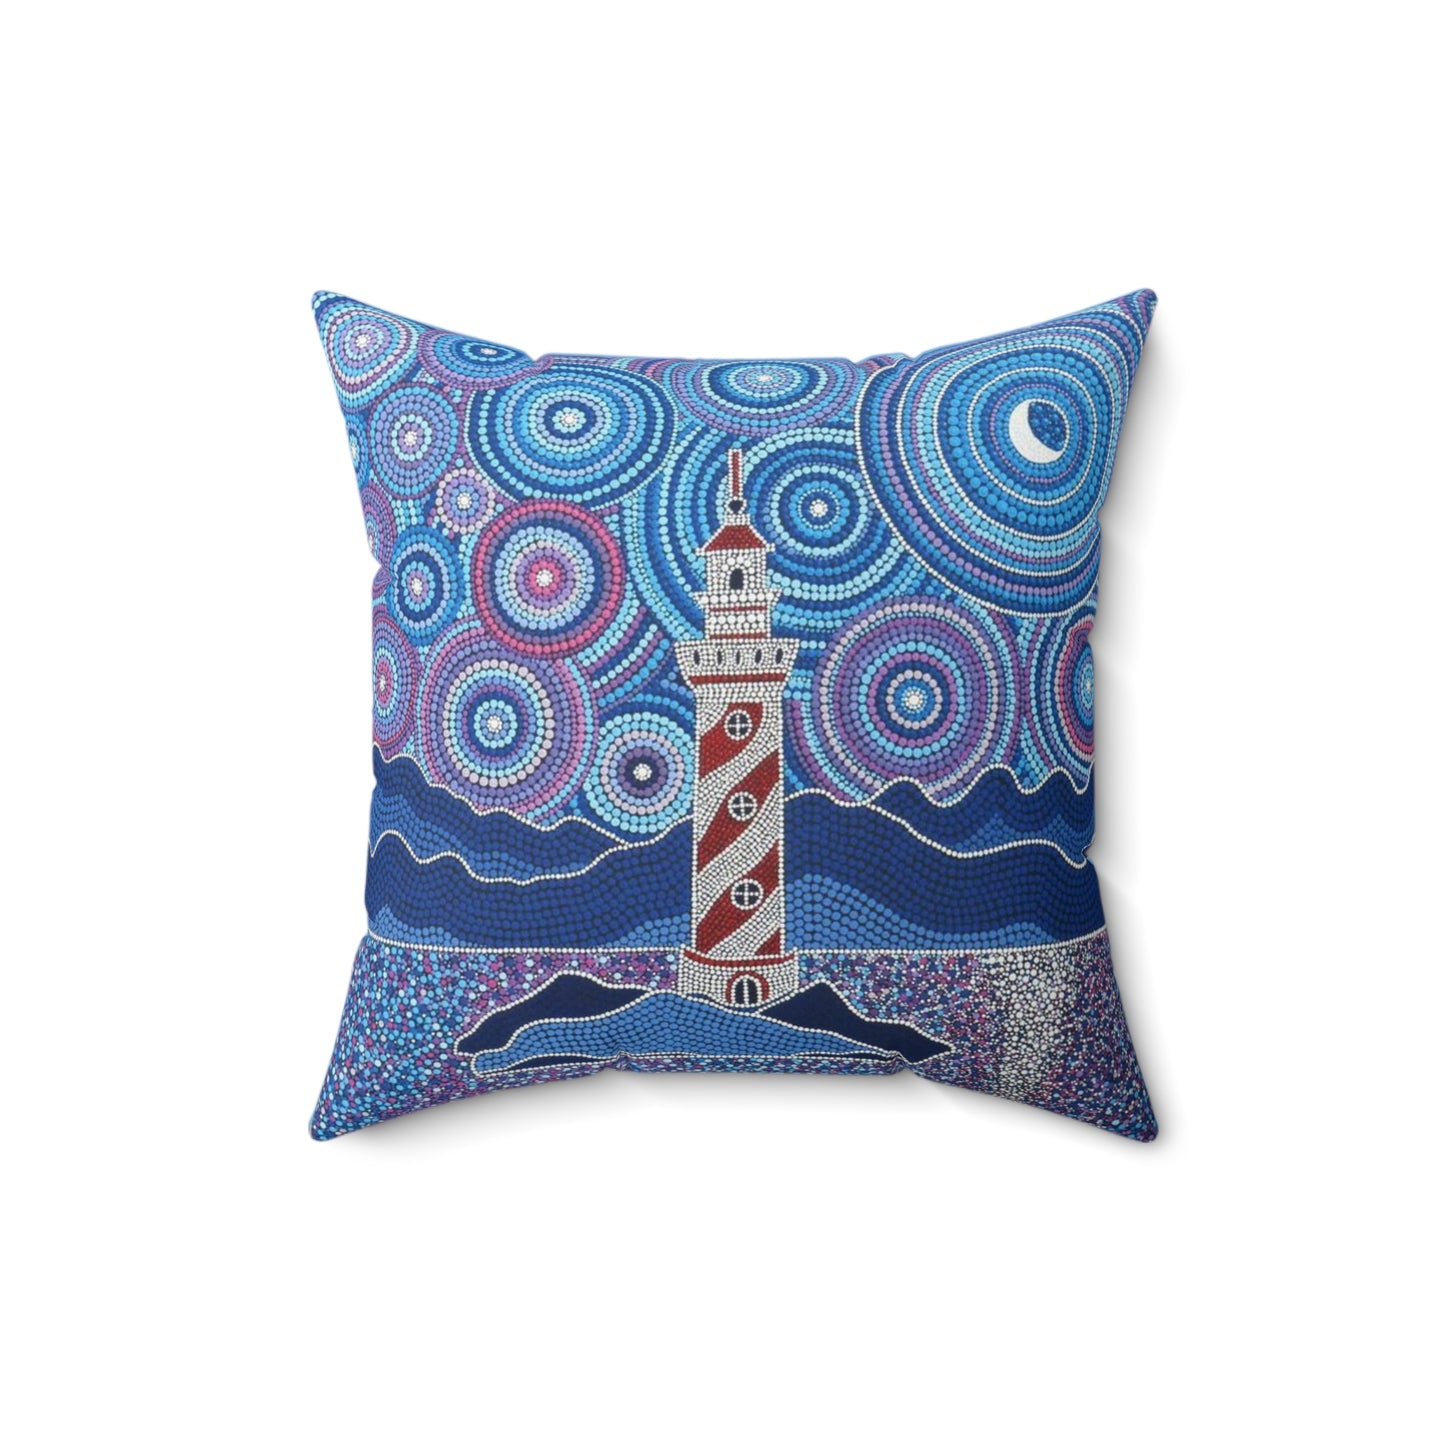 The Lighthouse: Spun Polyester Square Pillow